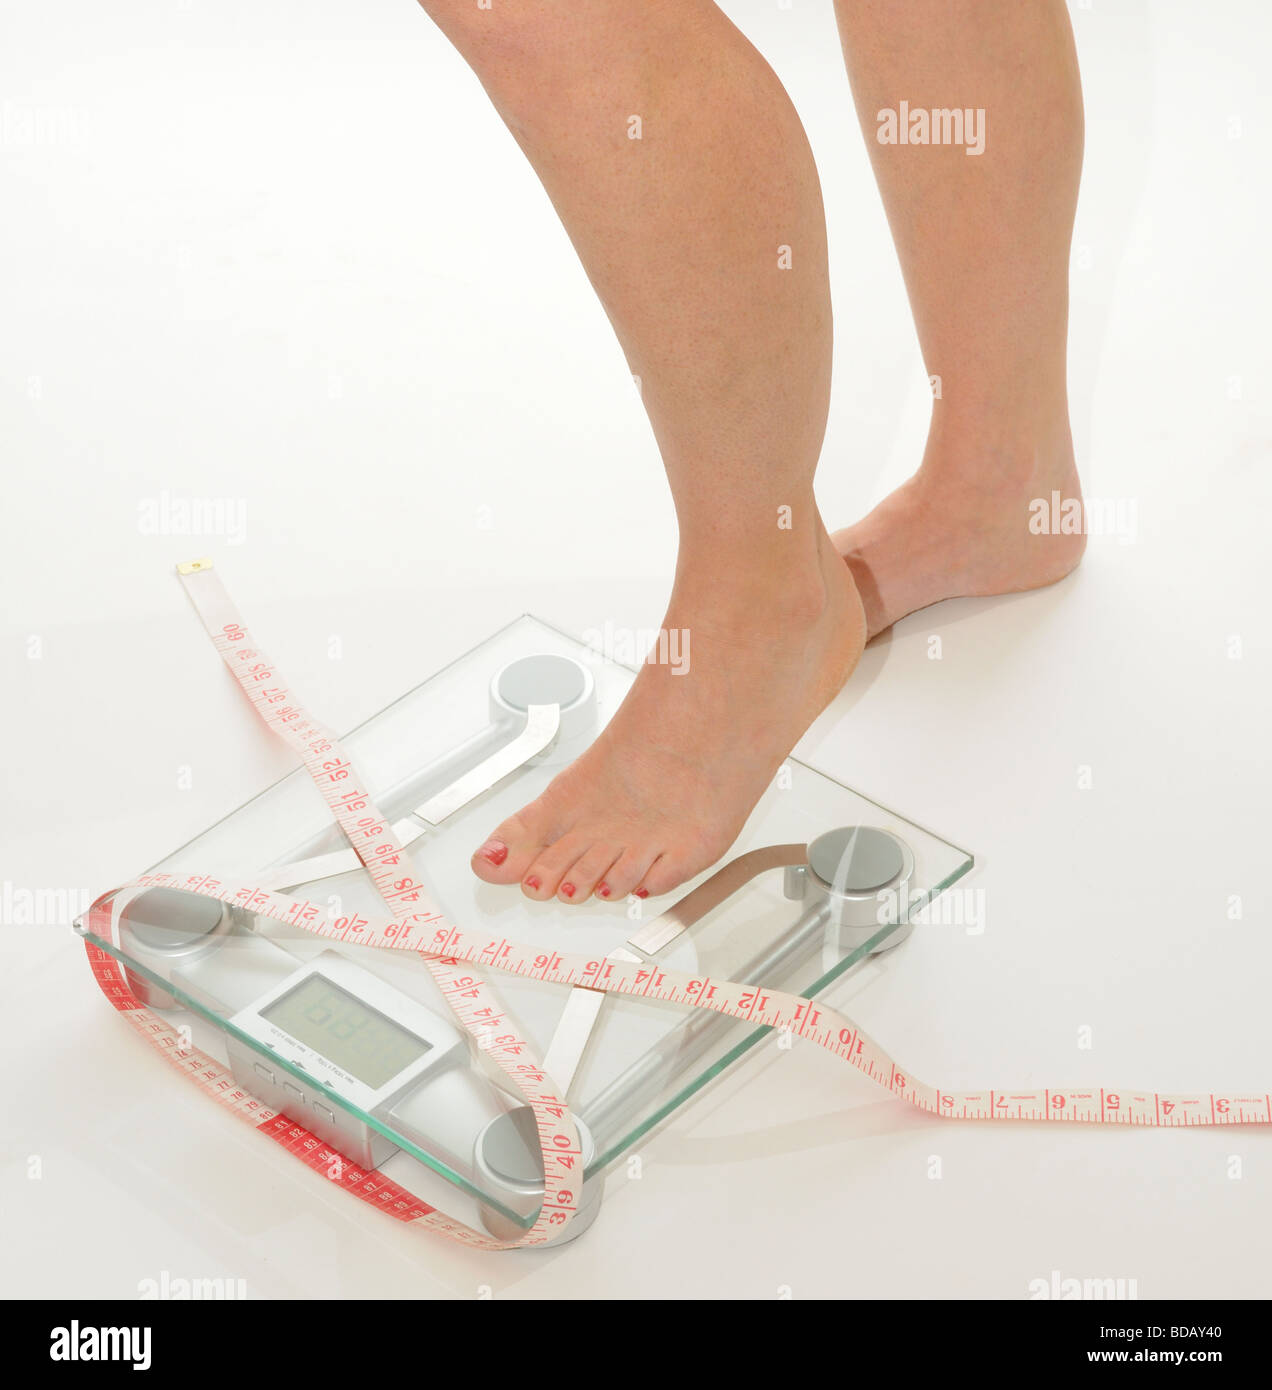 female legs and feet on bathroom scales draped with a tape measure Stock Photo